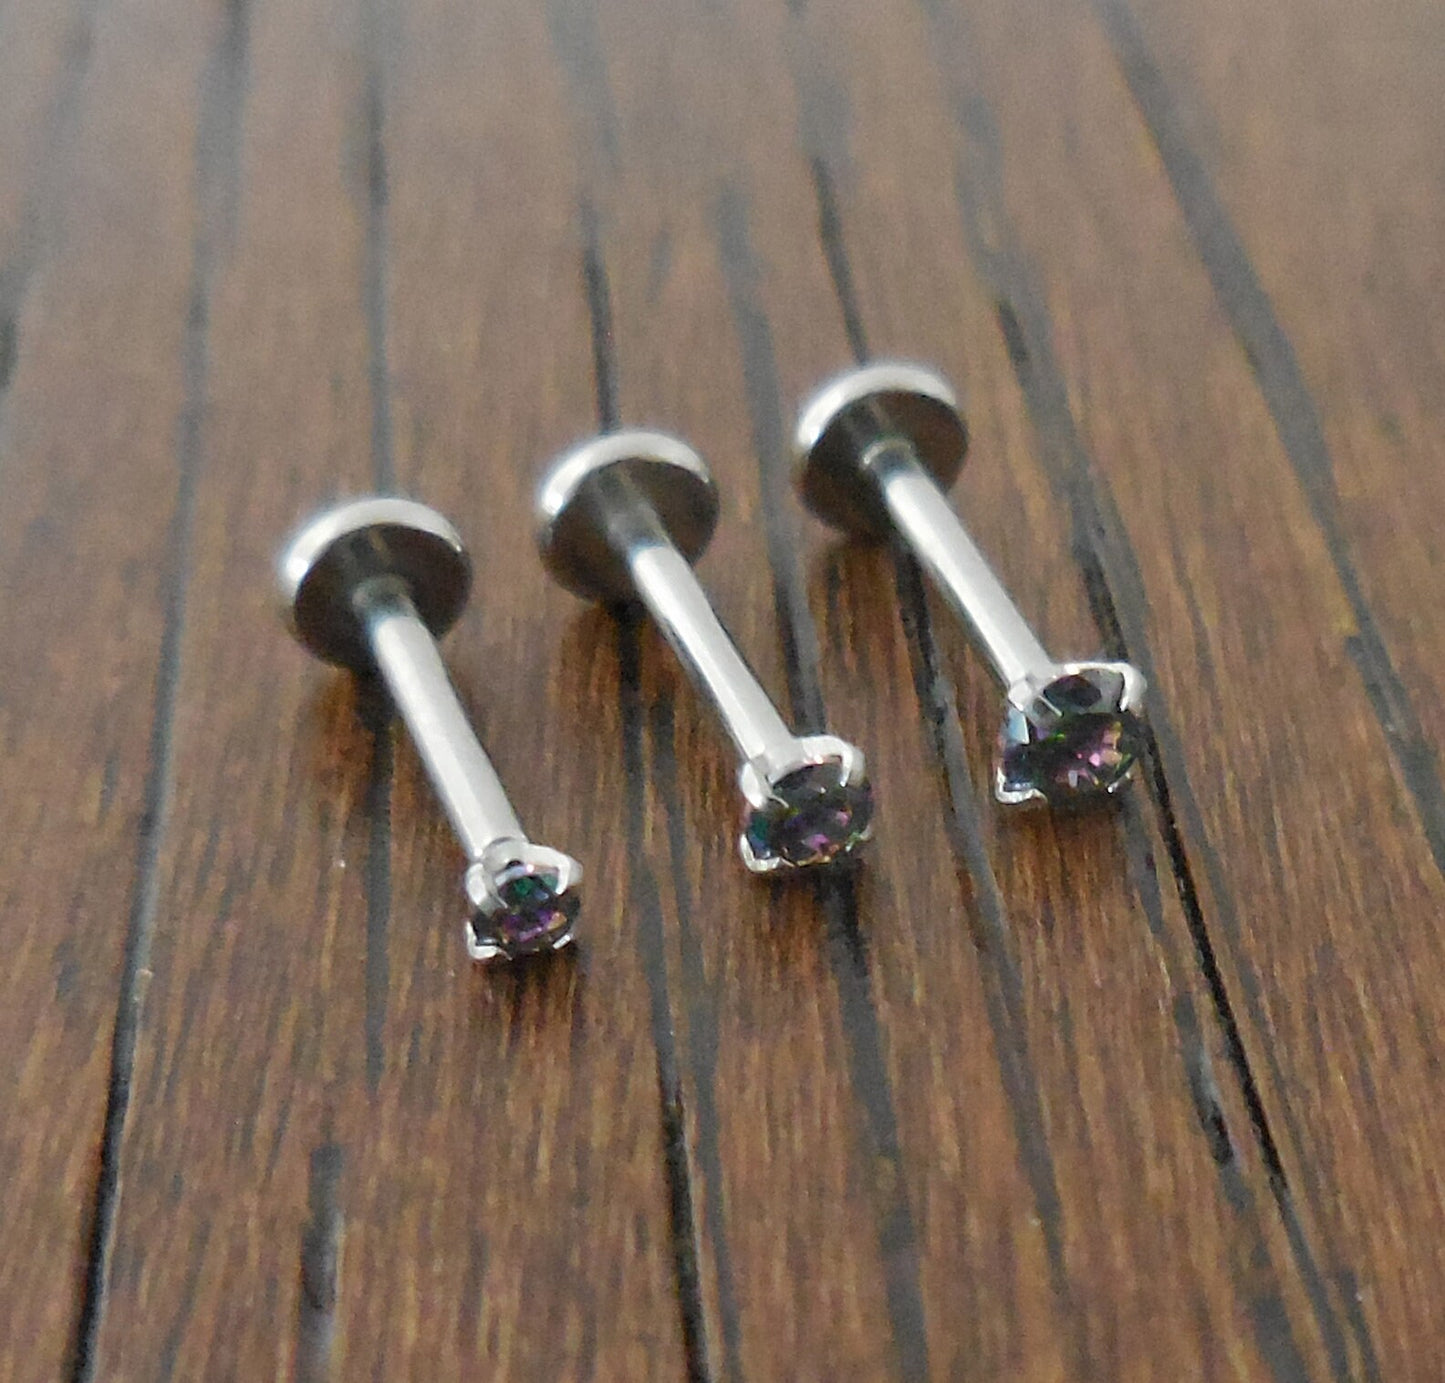 18G 2-4mm Tragus Rainbow Prong Set CZ Stone Threadless 6mm-8mm Push Pin Triple Forward Helix Nose Ring Labret Lip Earrings Stainless Steel